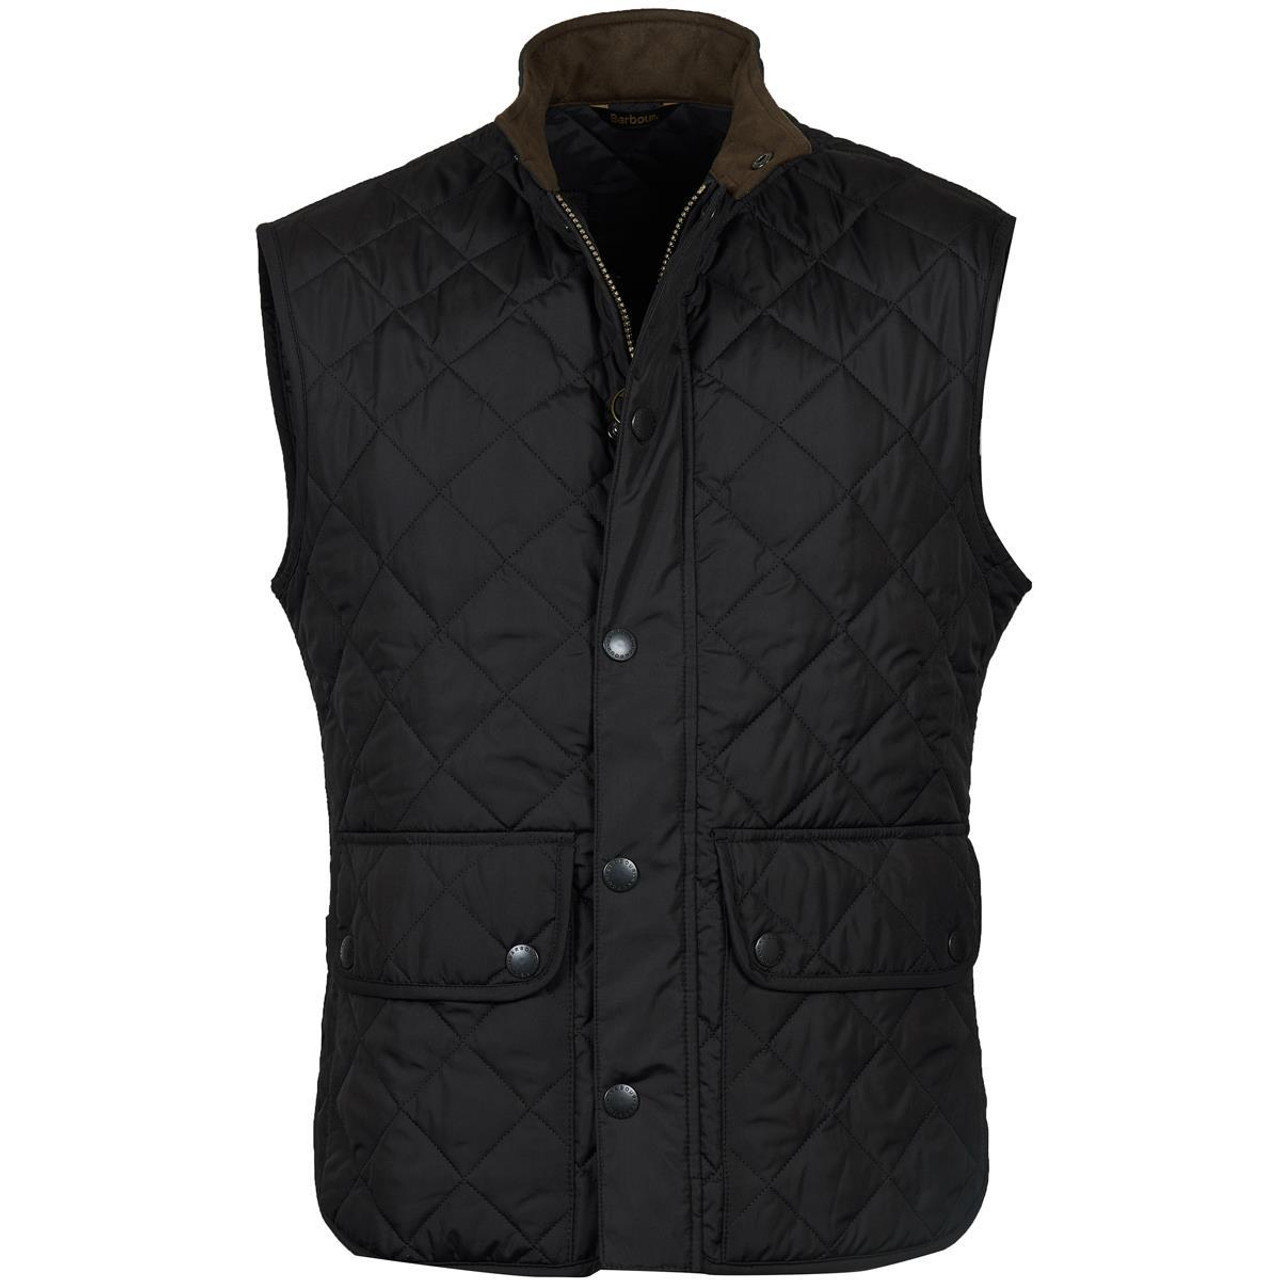 What is the number of studded pockets on the Barbour Lowerdale Gilet?